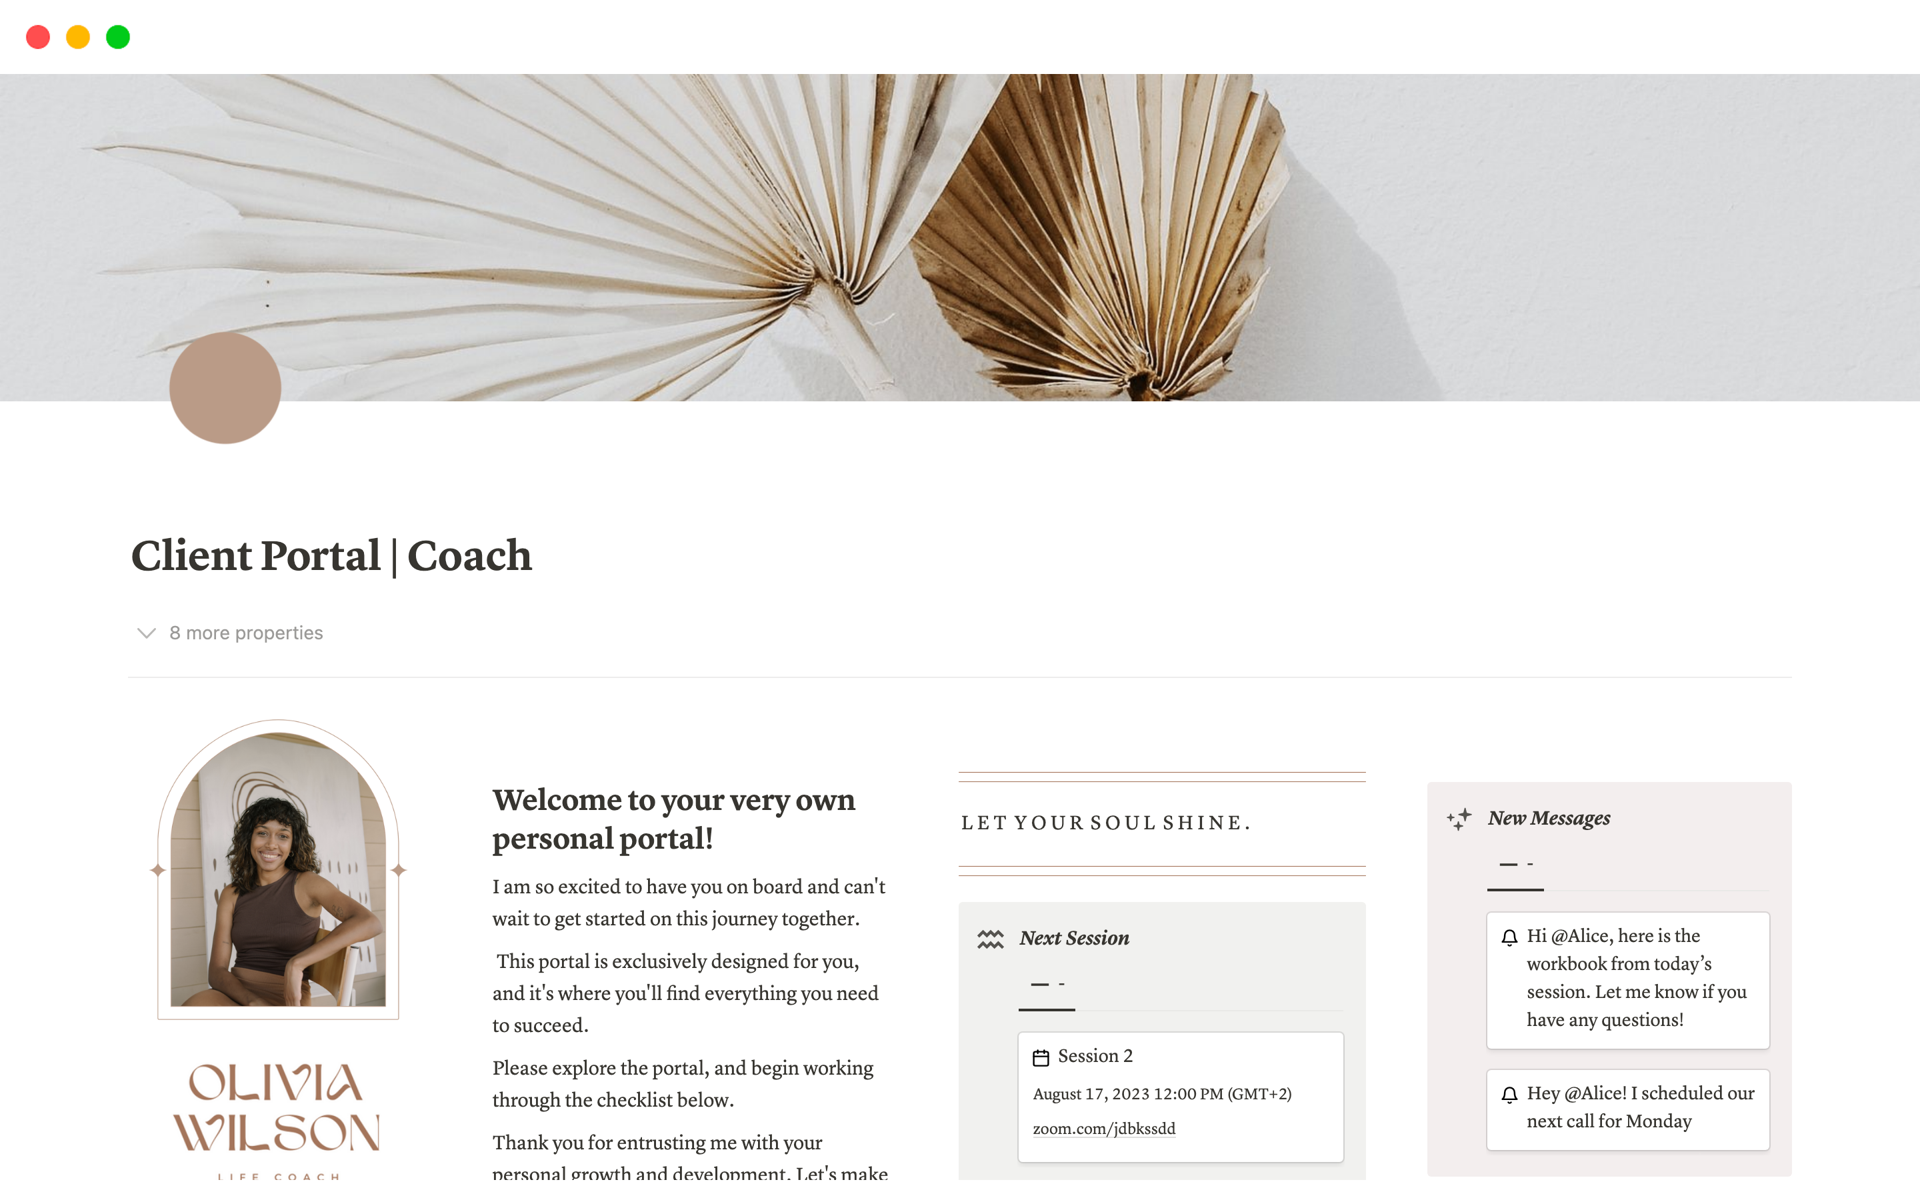 Coaches can create a personalized portal for each of their clients, which allows them to gather important information and feedback, share resources and scheduling, track payments, and maintain clear and direct communication, all in one location.